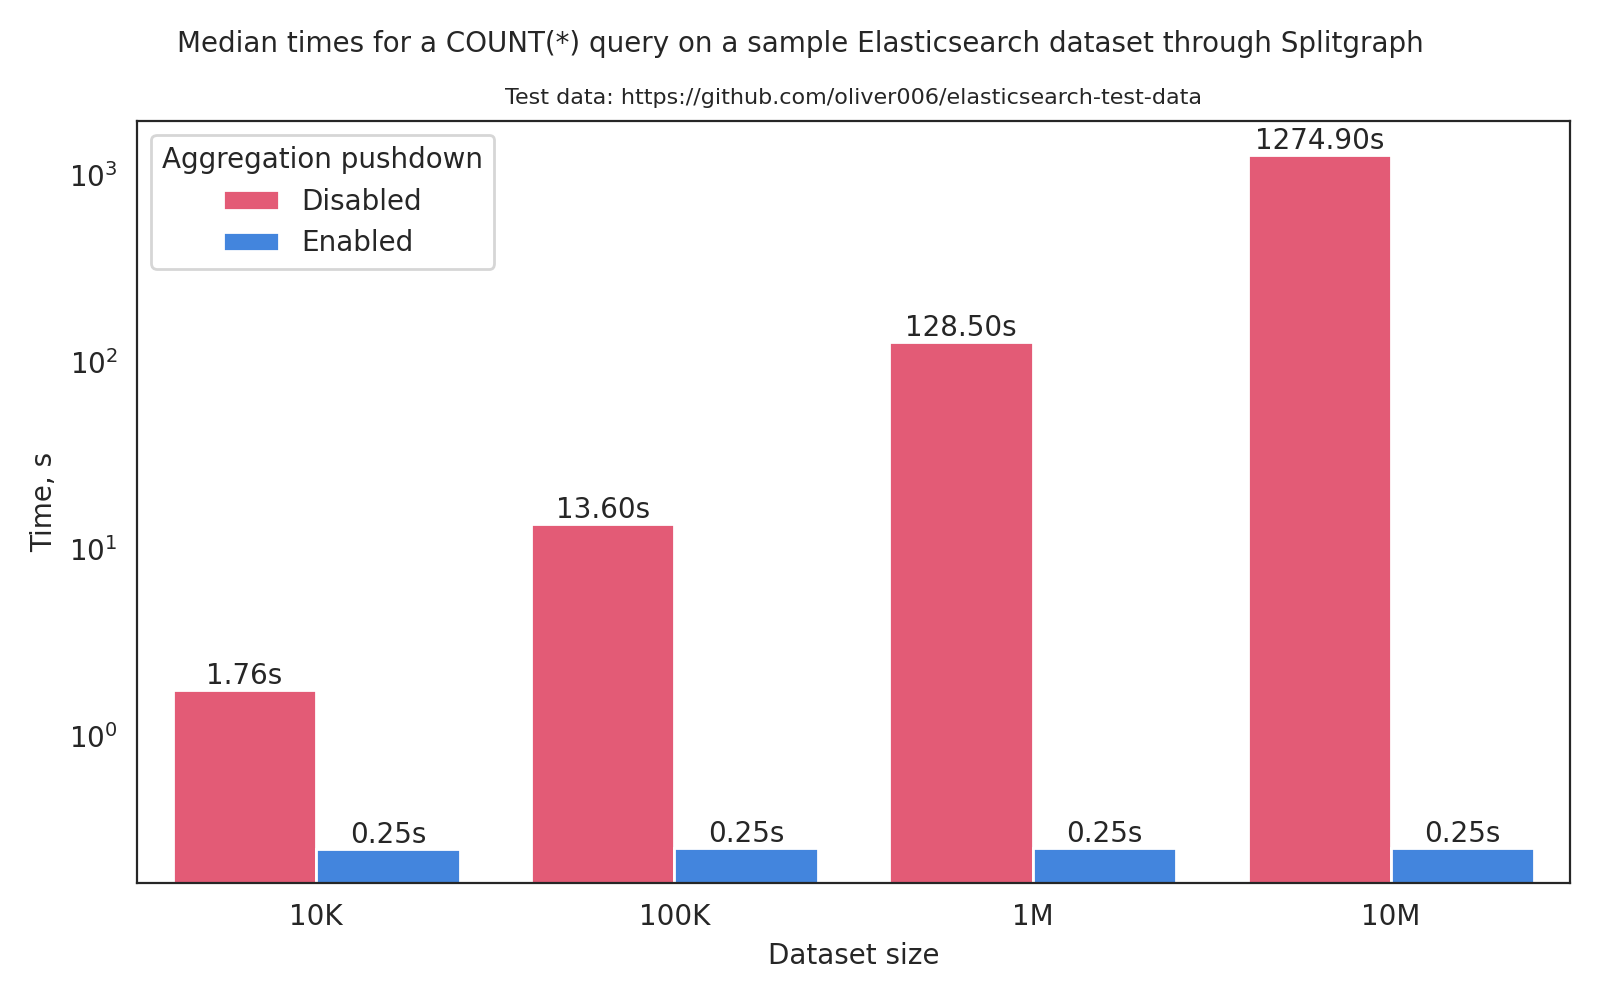 Comparing the speed of a COUNT(*) query on Elasticsearch with and without aggregation pushdown